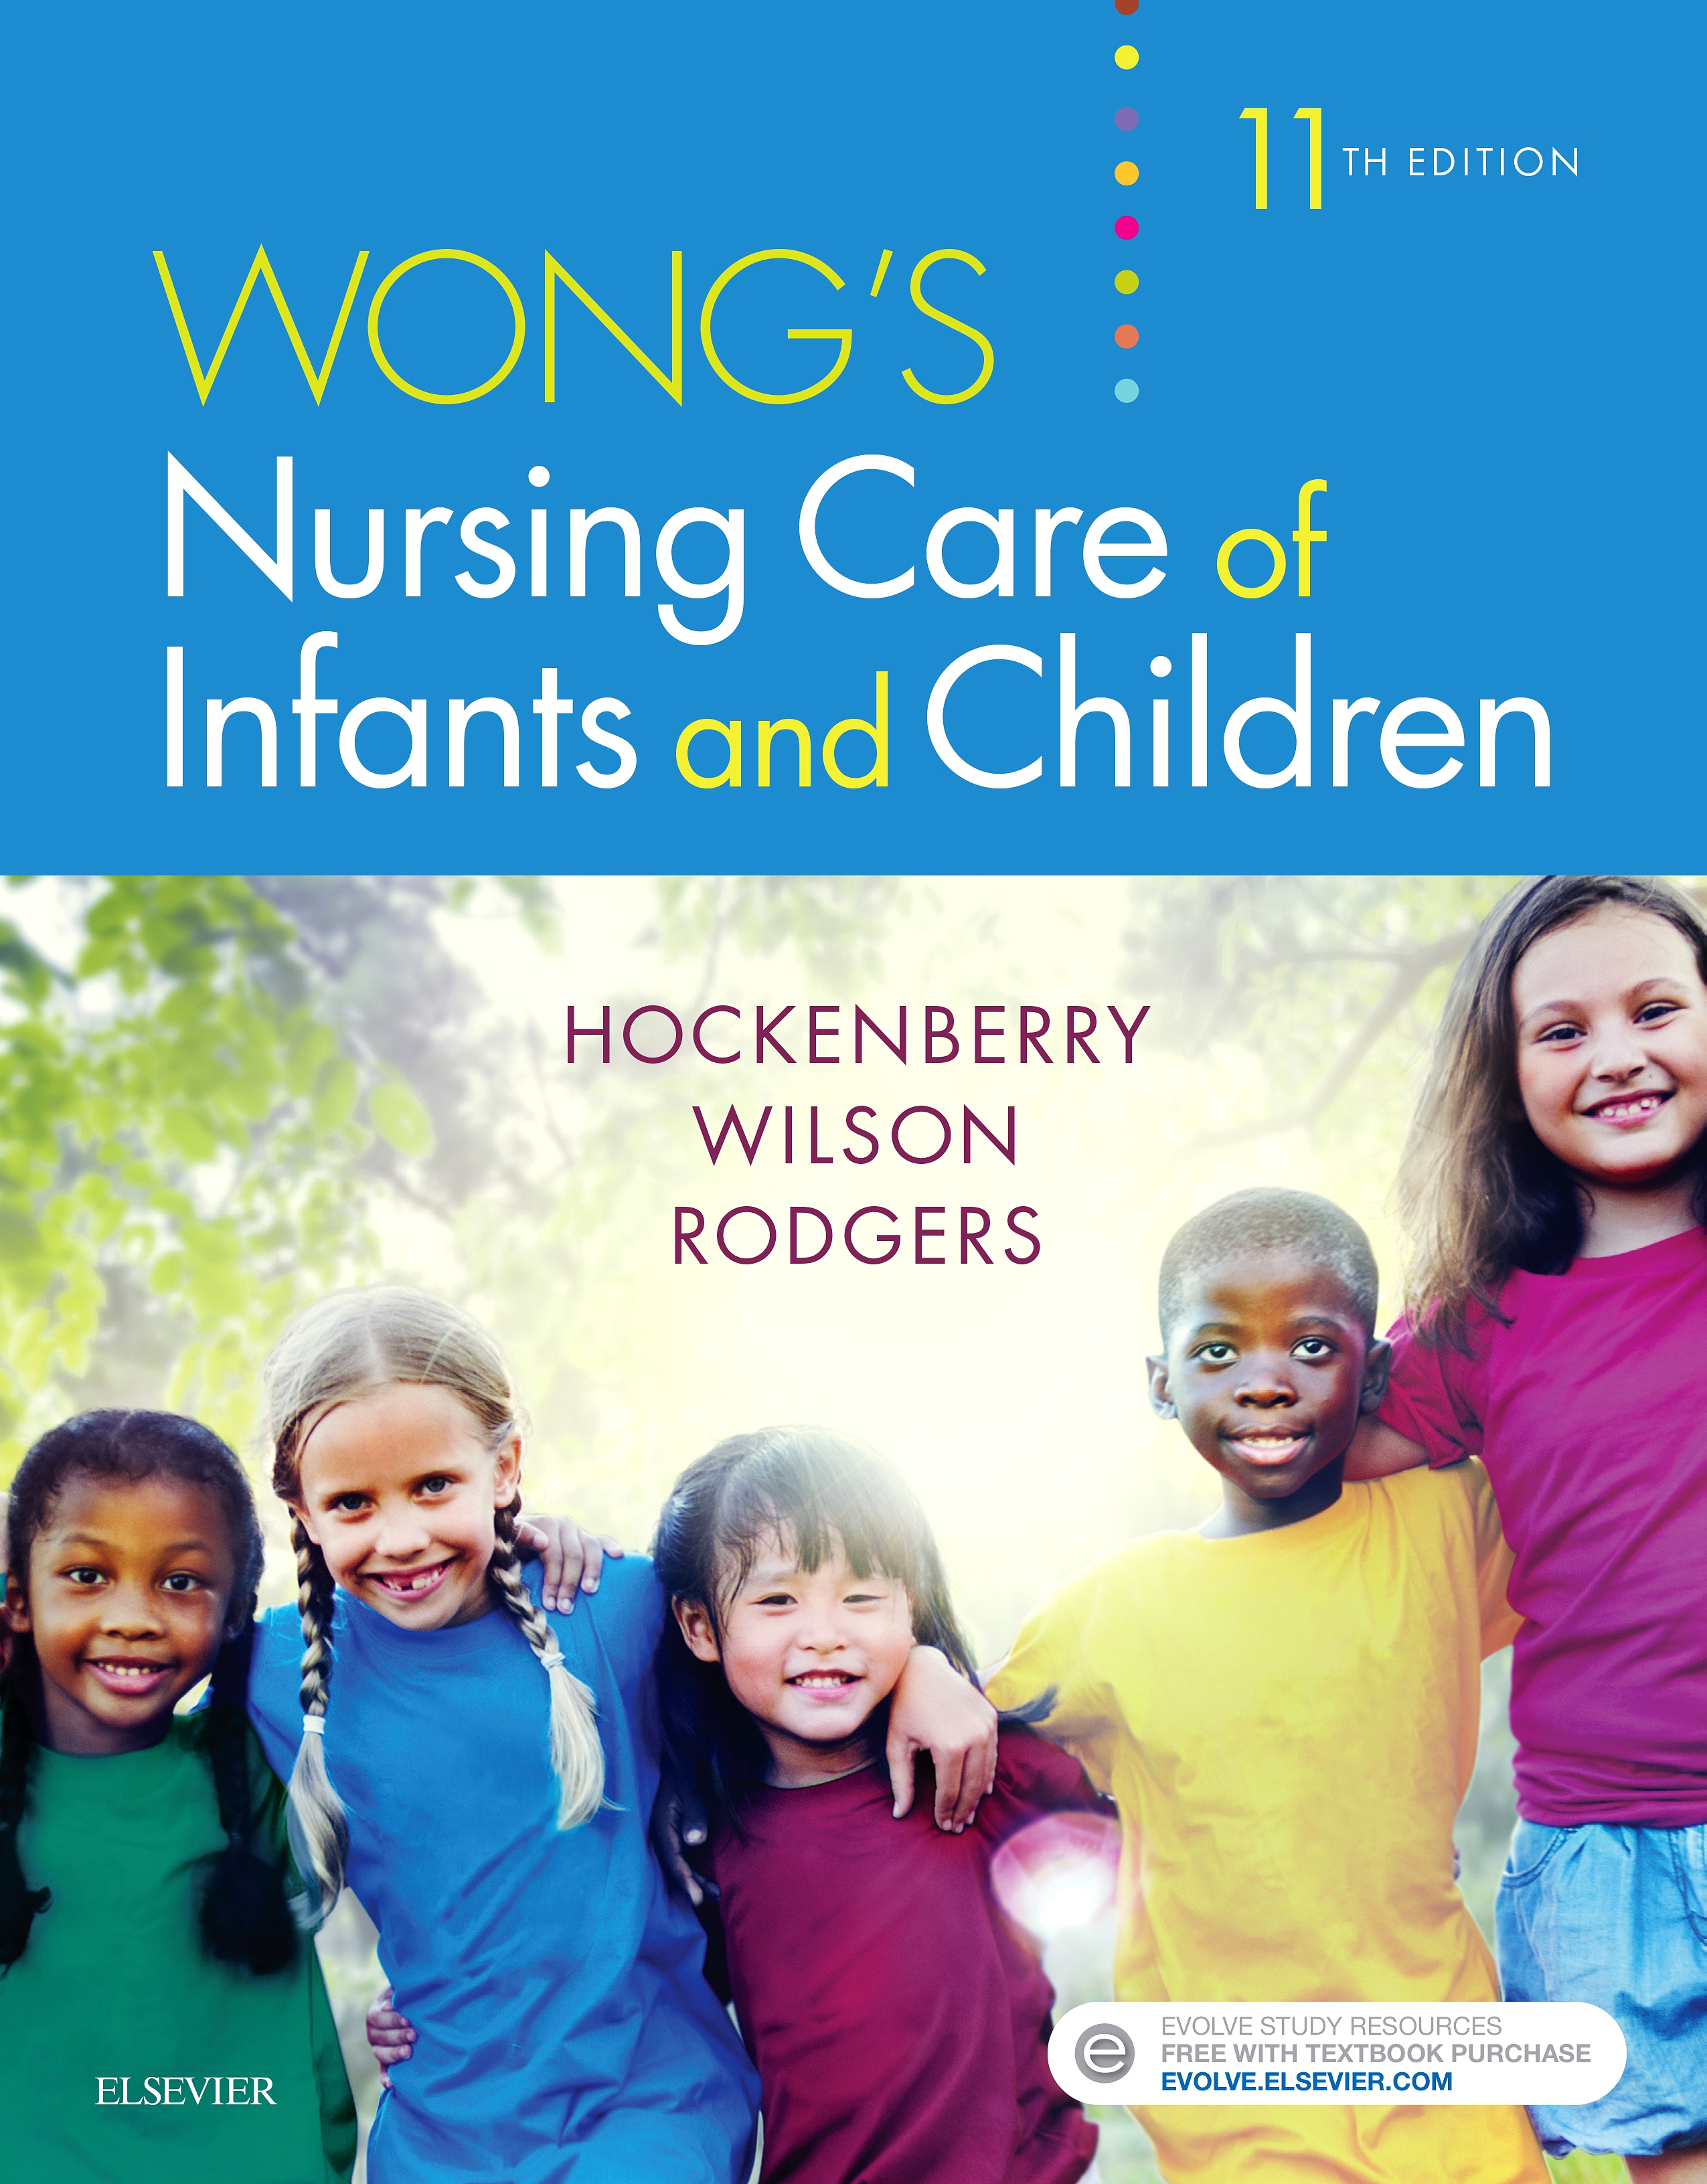 Evolve Resources for Wong's Nursing Care of Infants and Children, 11th